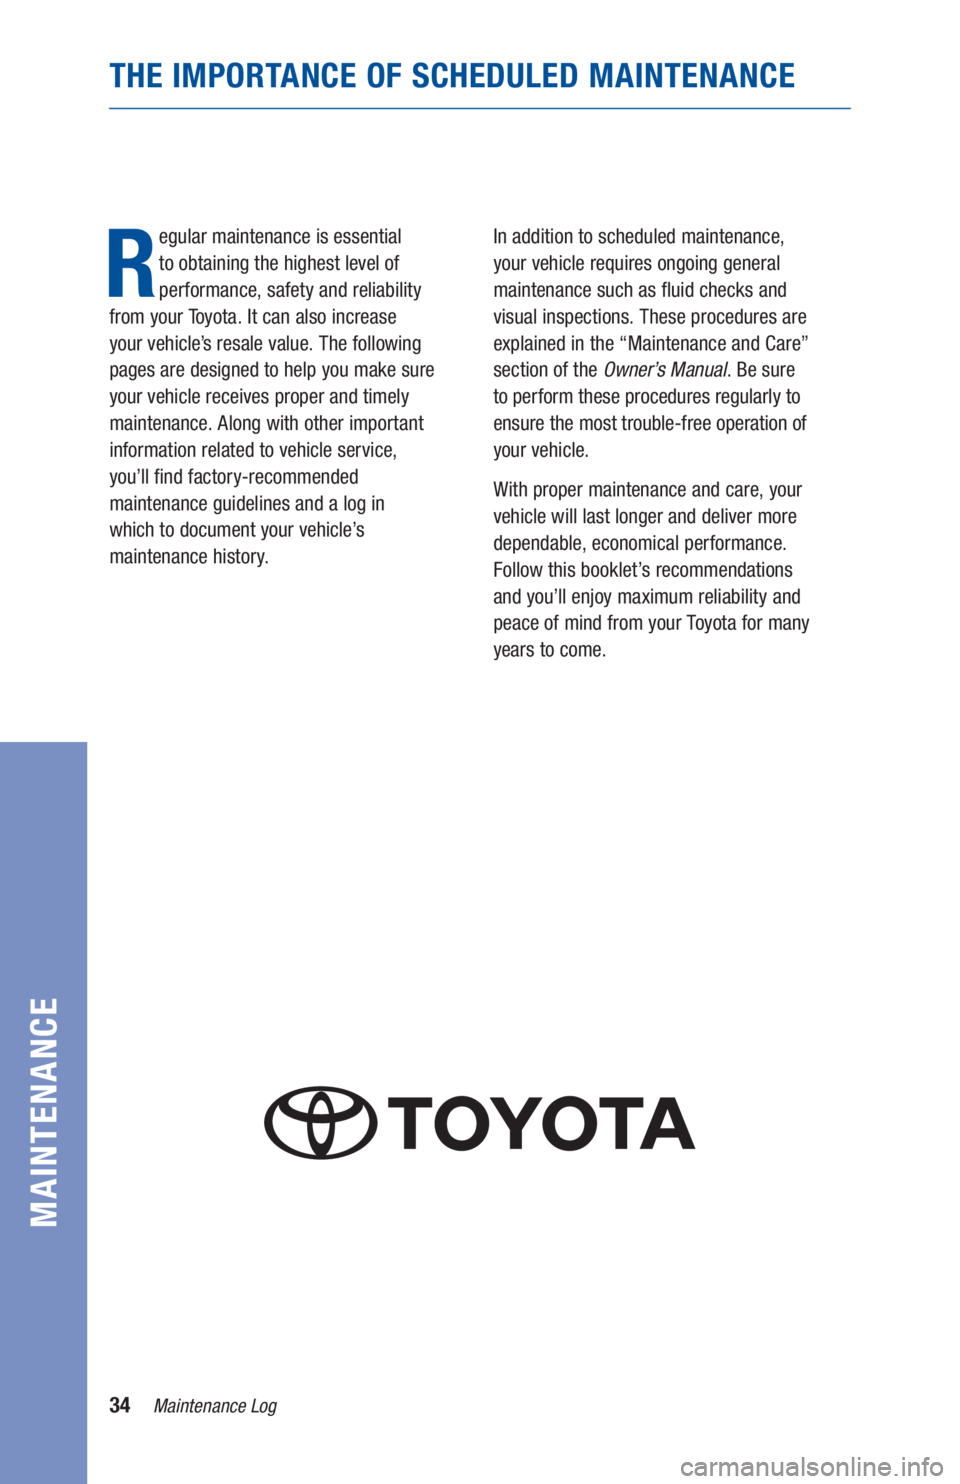 TOYOTA PRIUS 2019  Warranties & Maintenance Guides (in English) 34Maintenance Log
MAINTENANCE
THE IMPORTANCE OF SCHEDULED MAINTENANCE
R
egular maintenance is essential  
to obtaining the highest level of 
performance, safety and reliability  
from your Toyota. It 